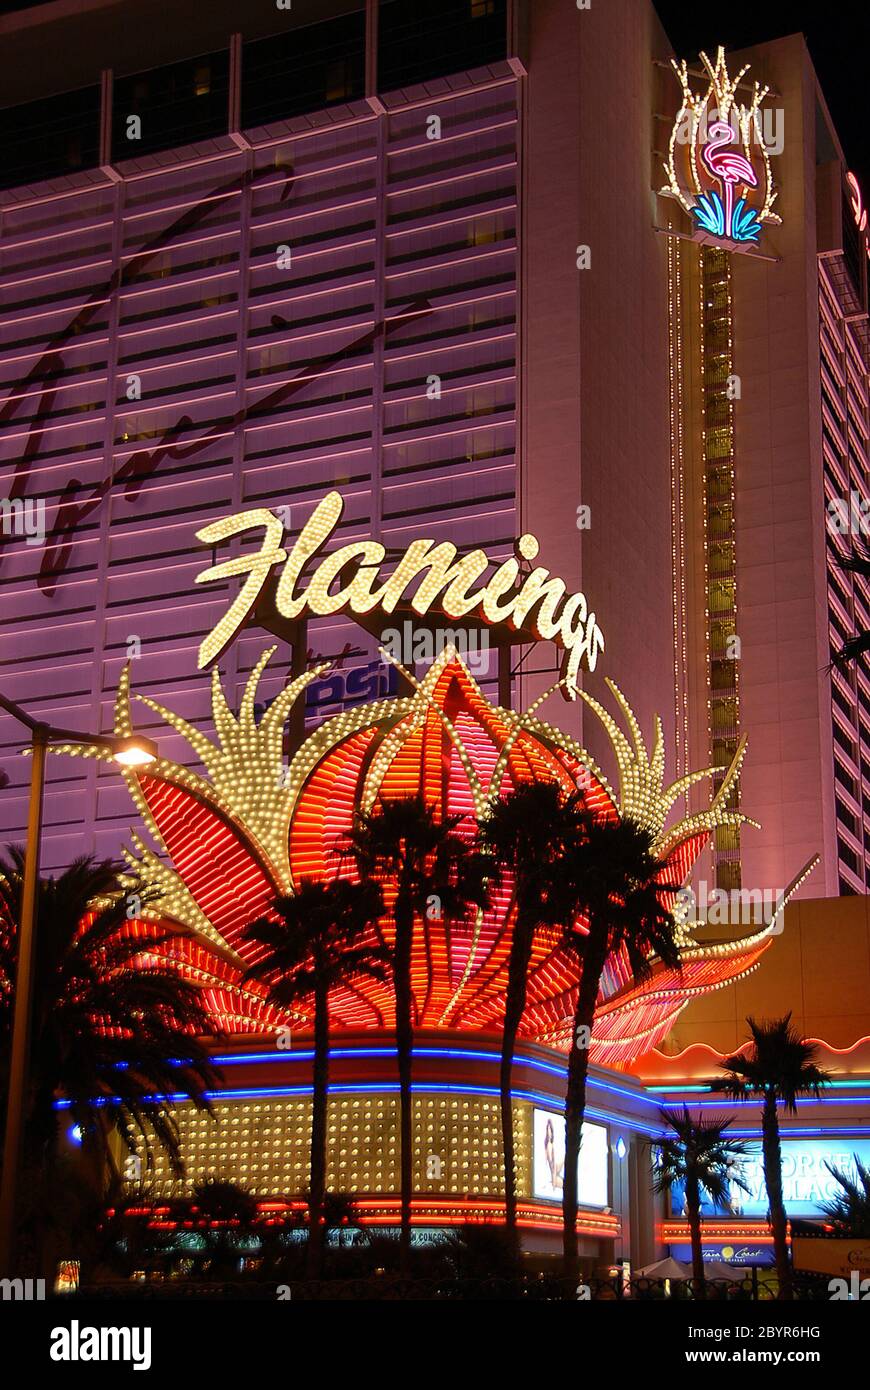 Flamingo Hotel Las Vegas 215 Hotel and most important places in Las Vegas The most beautiful place in Las Vegas Stock Photo